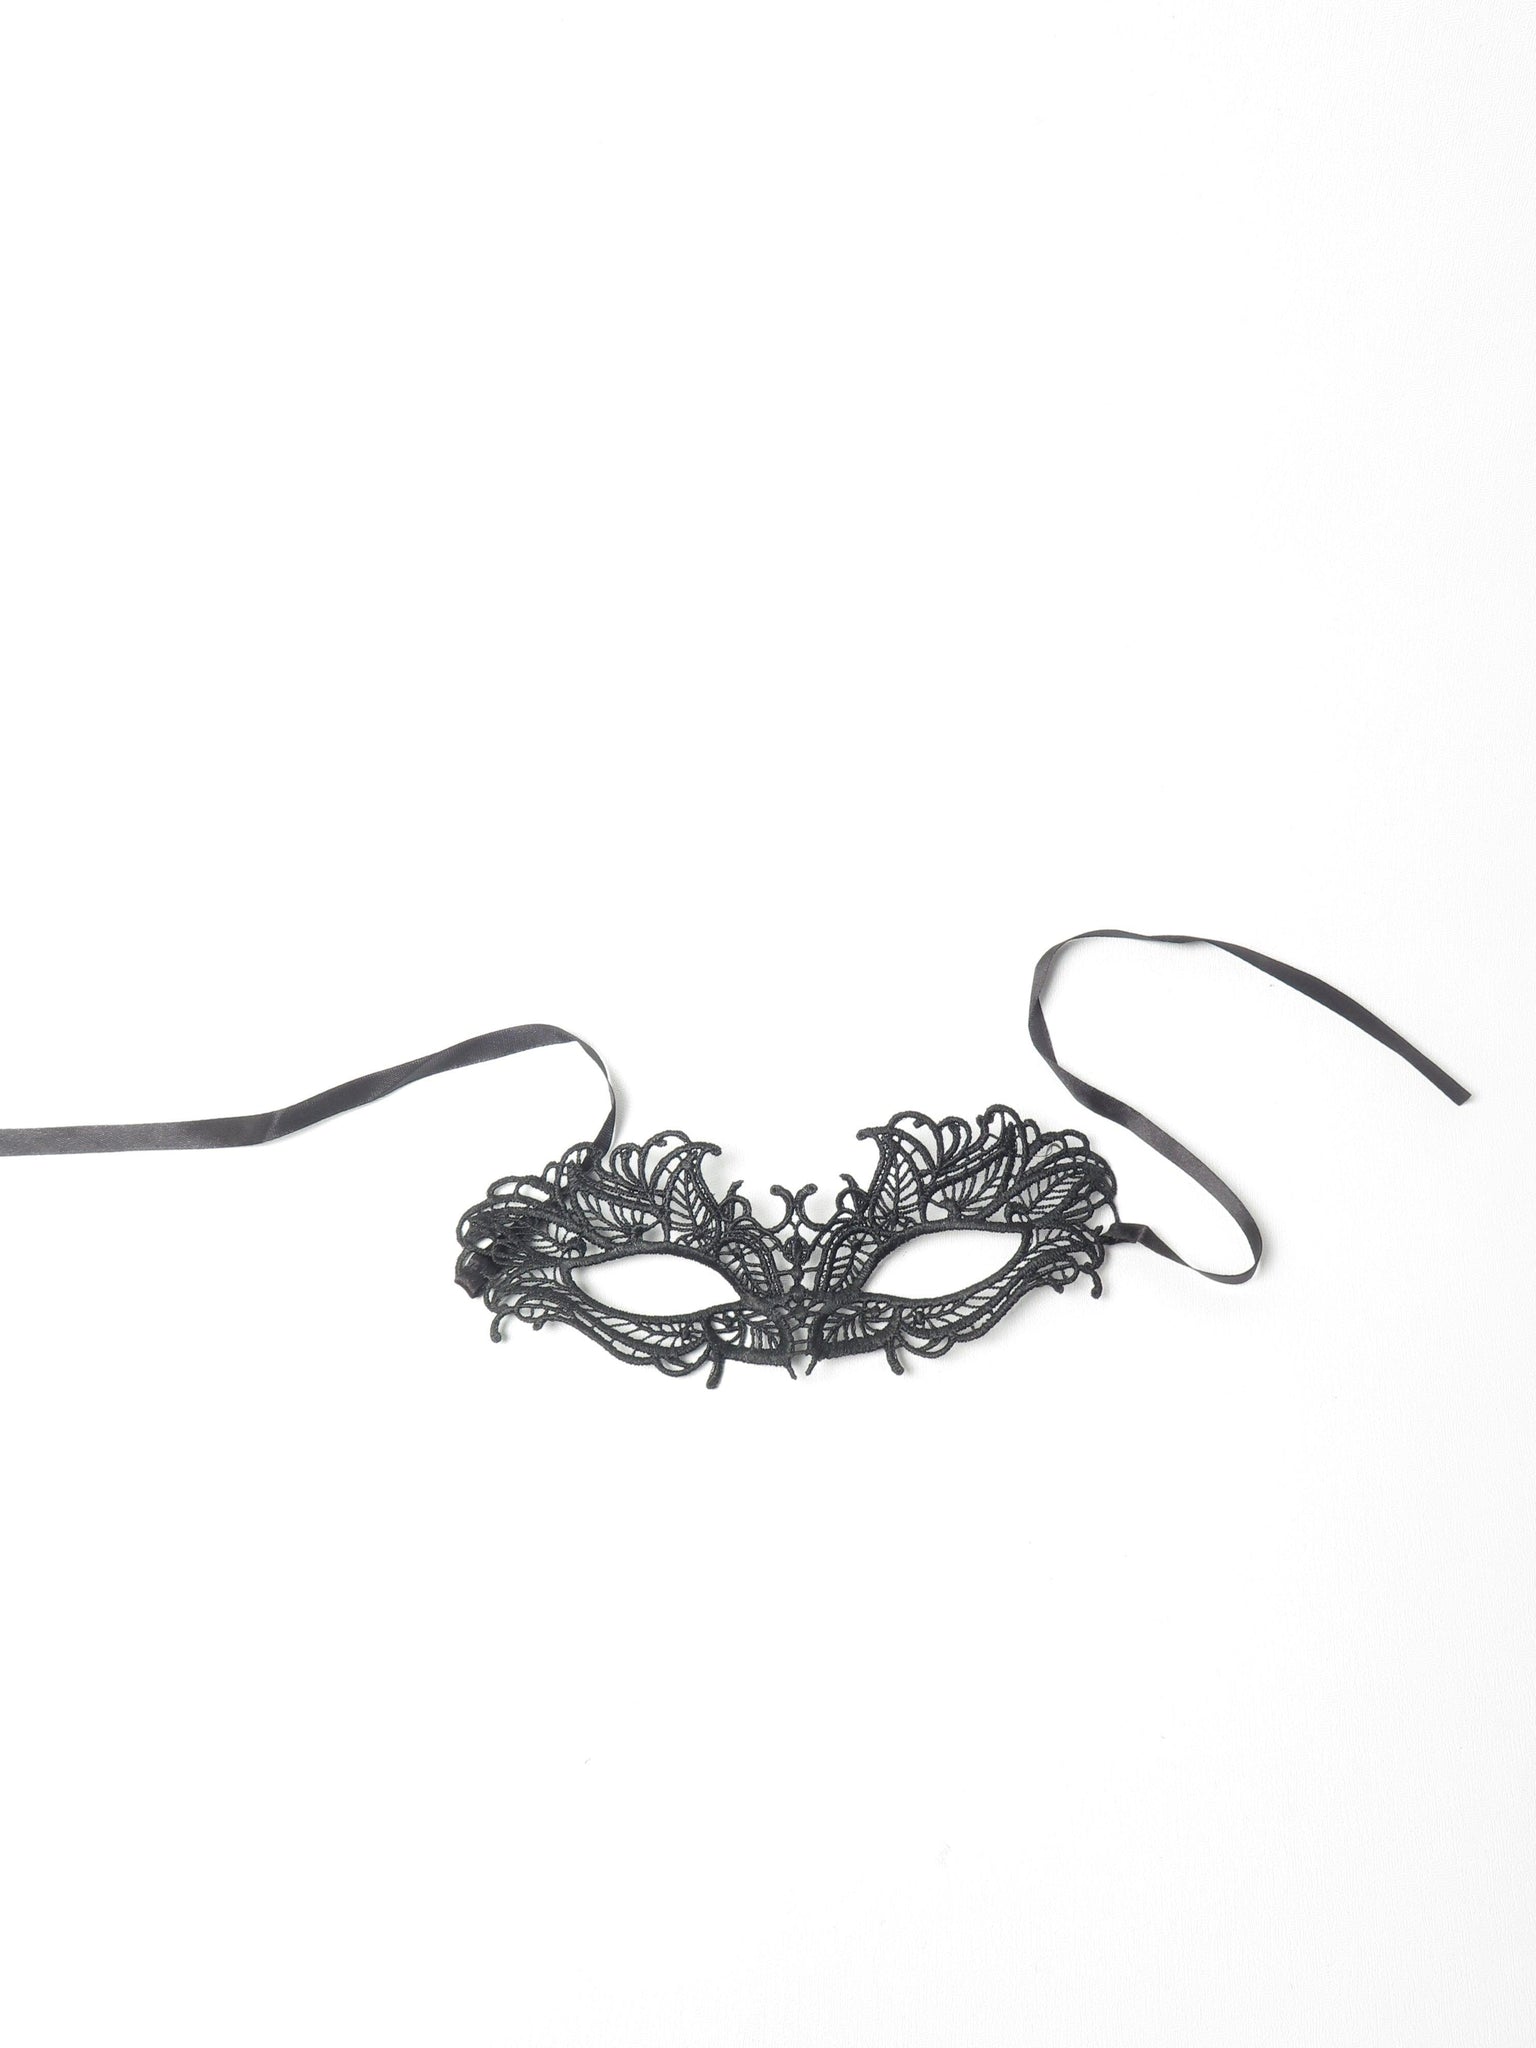 New Black Lace Mask - The Harlequin